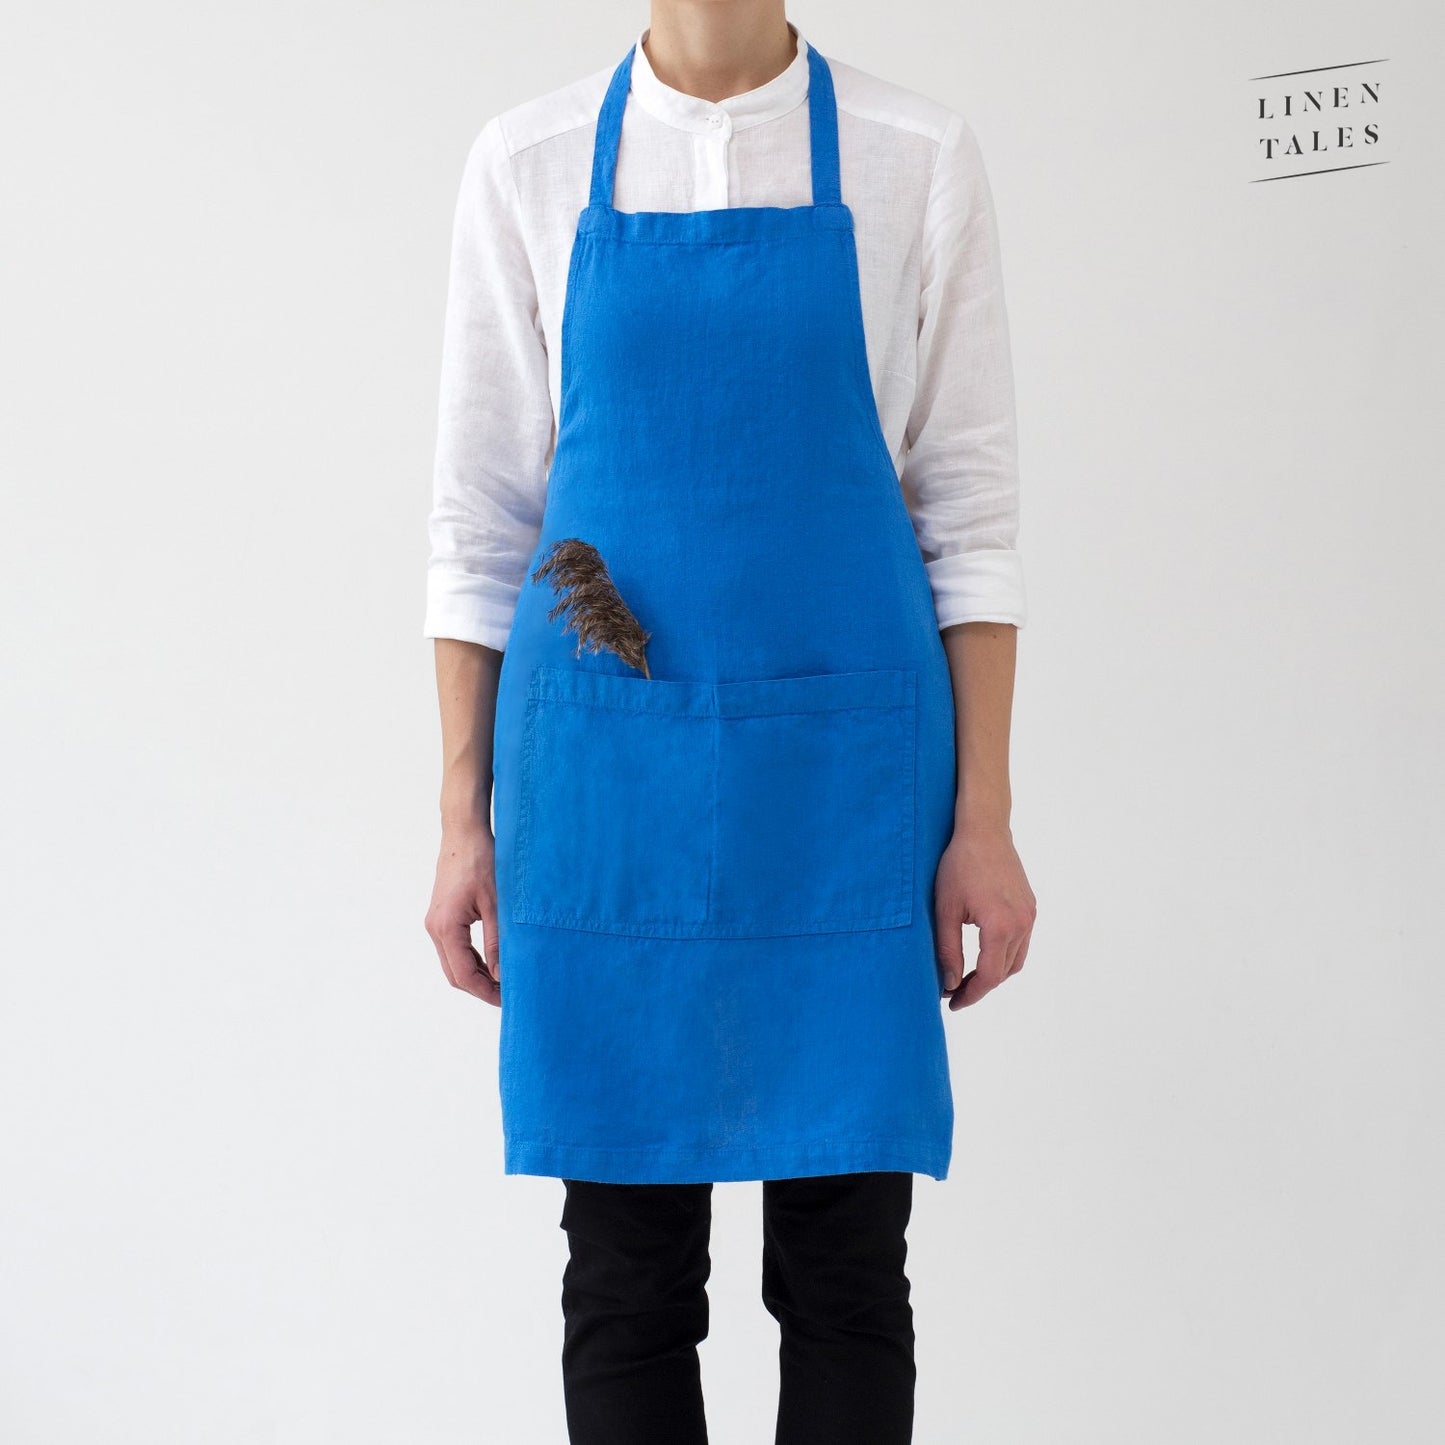 Aprons Daily